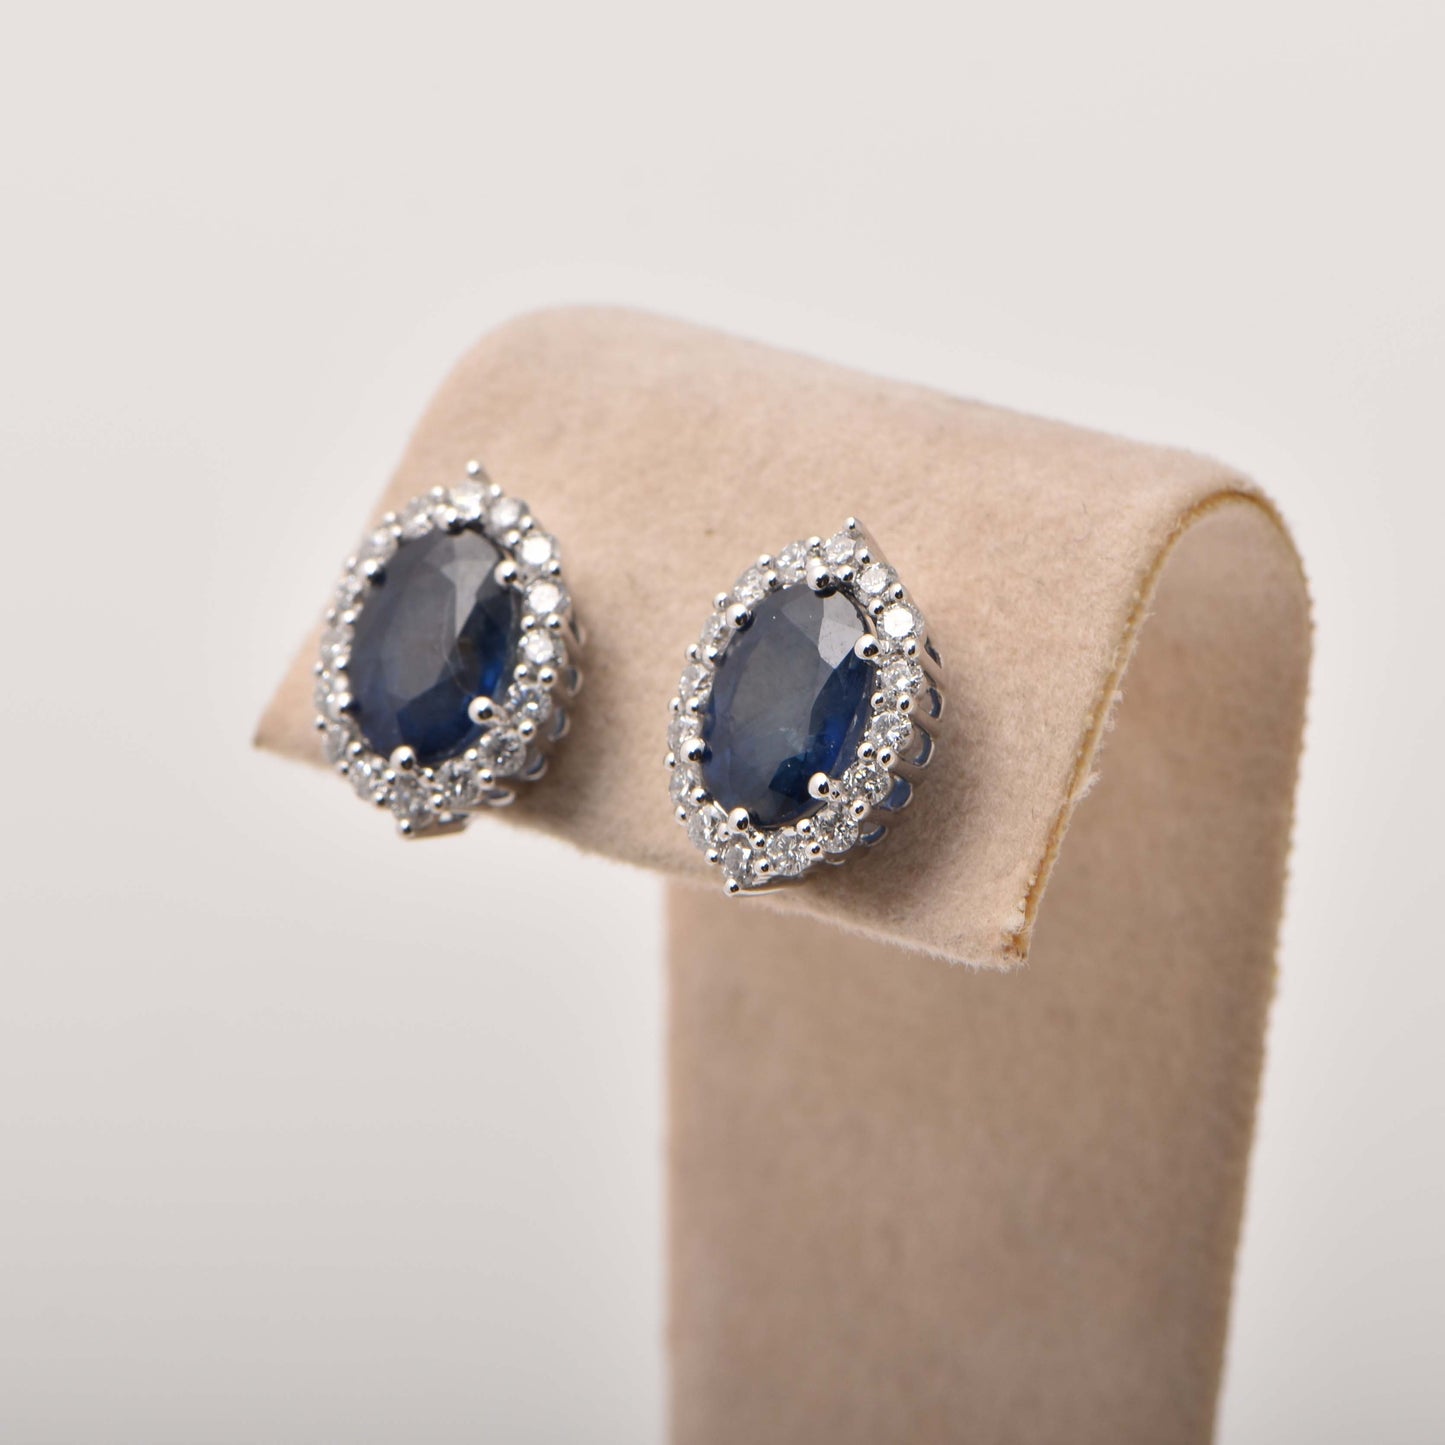 Ceylon Sapphire and Diamond Earrings In 18ct White Gold